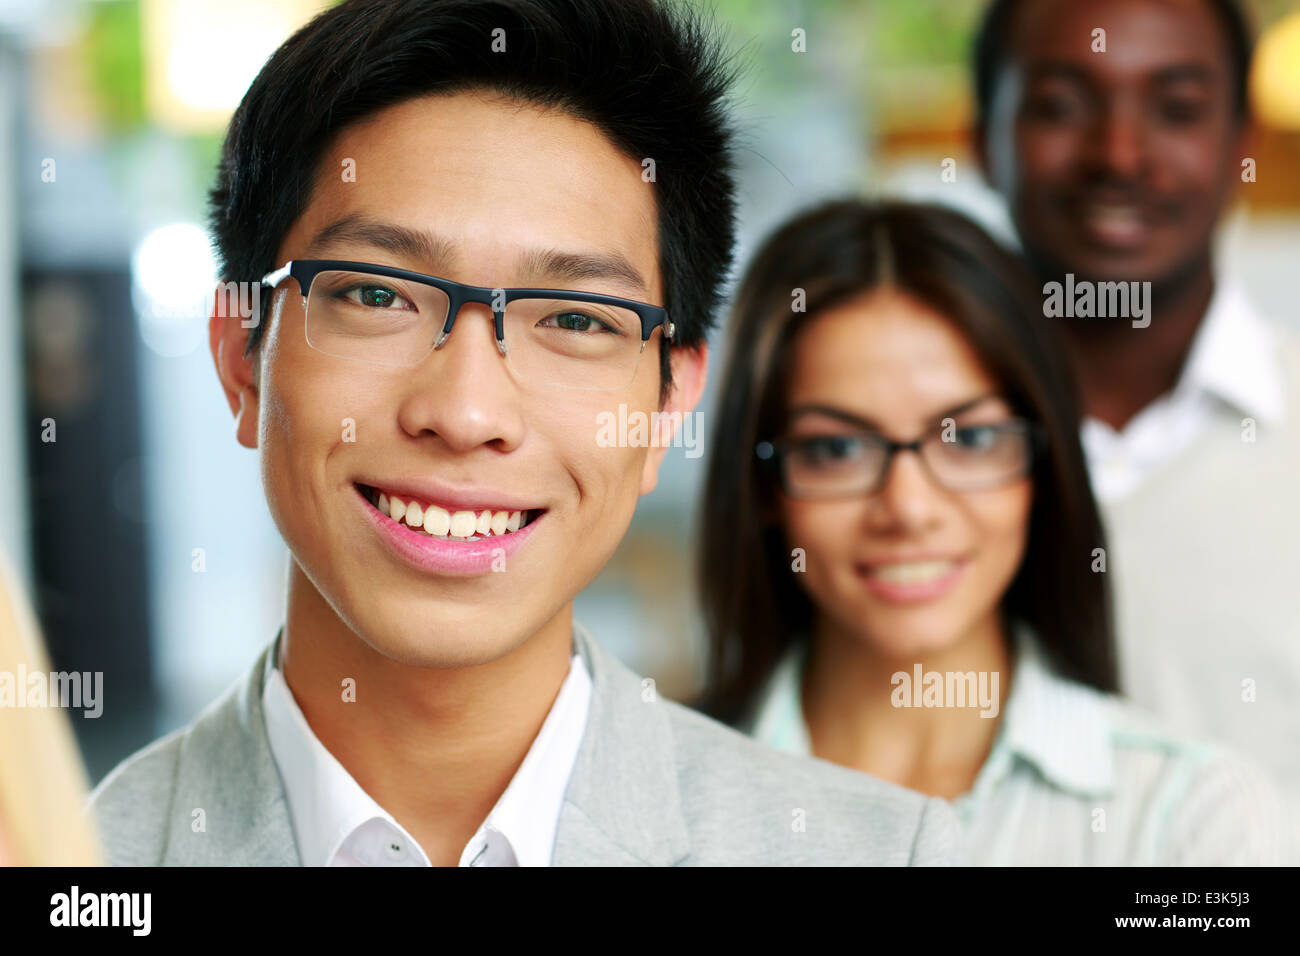 Portrait of a smiling asian businessman standing in front of colleagues  Stock Photo